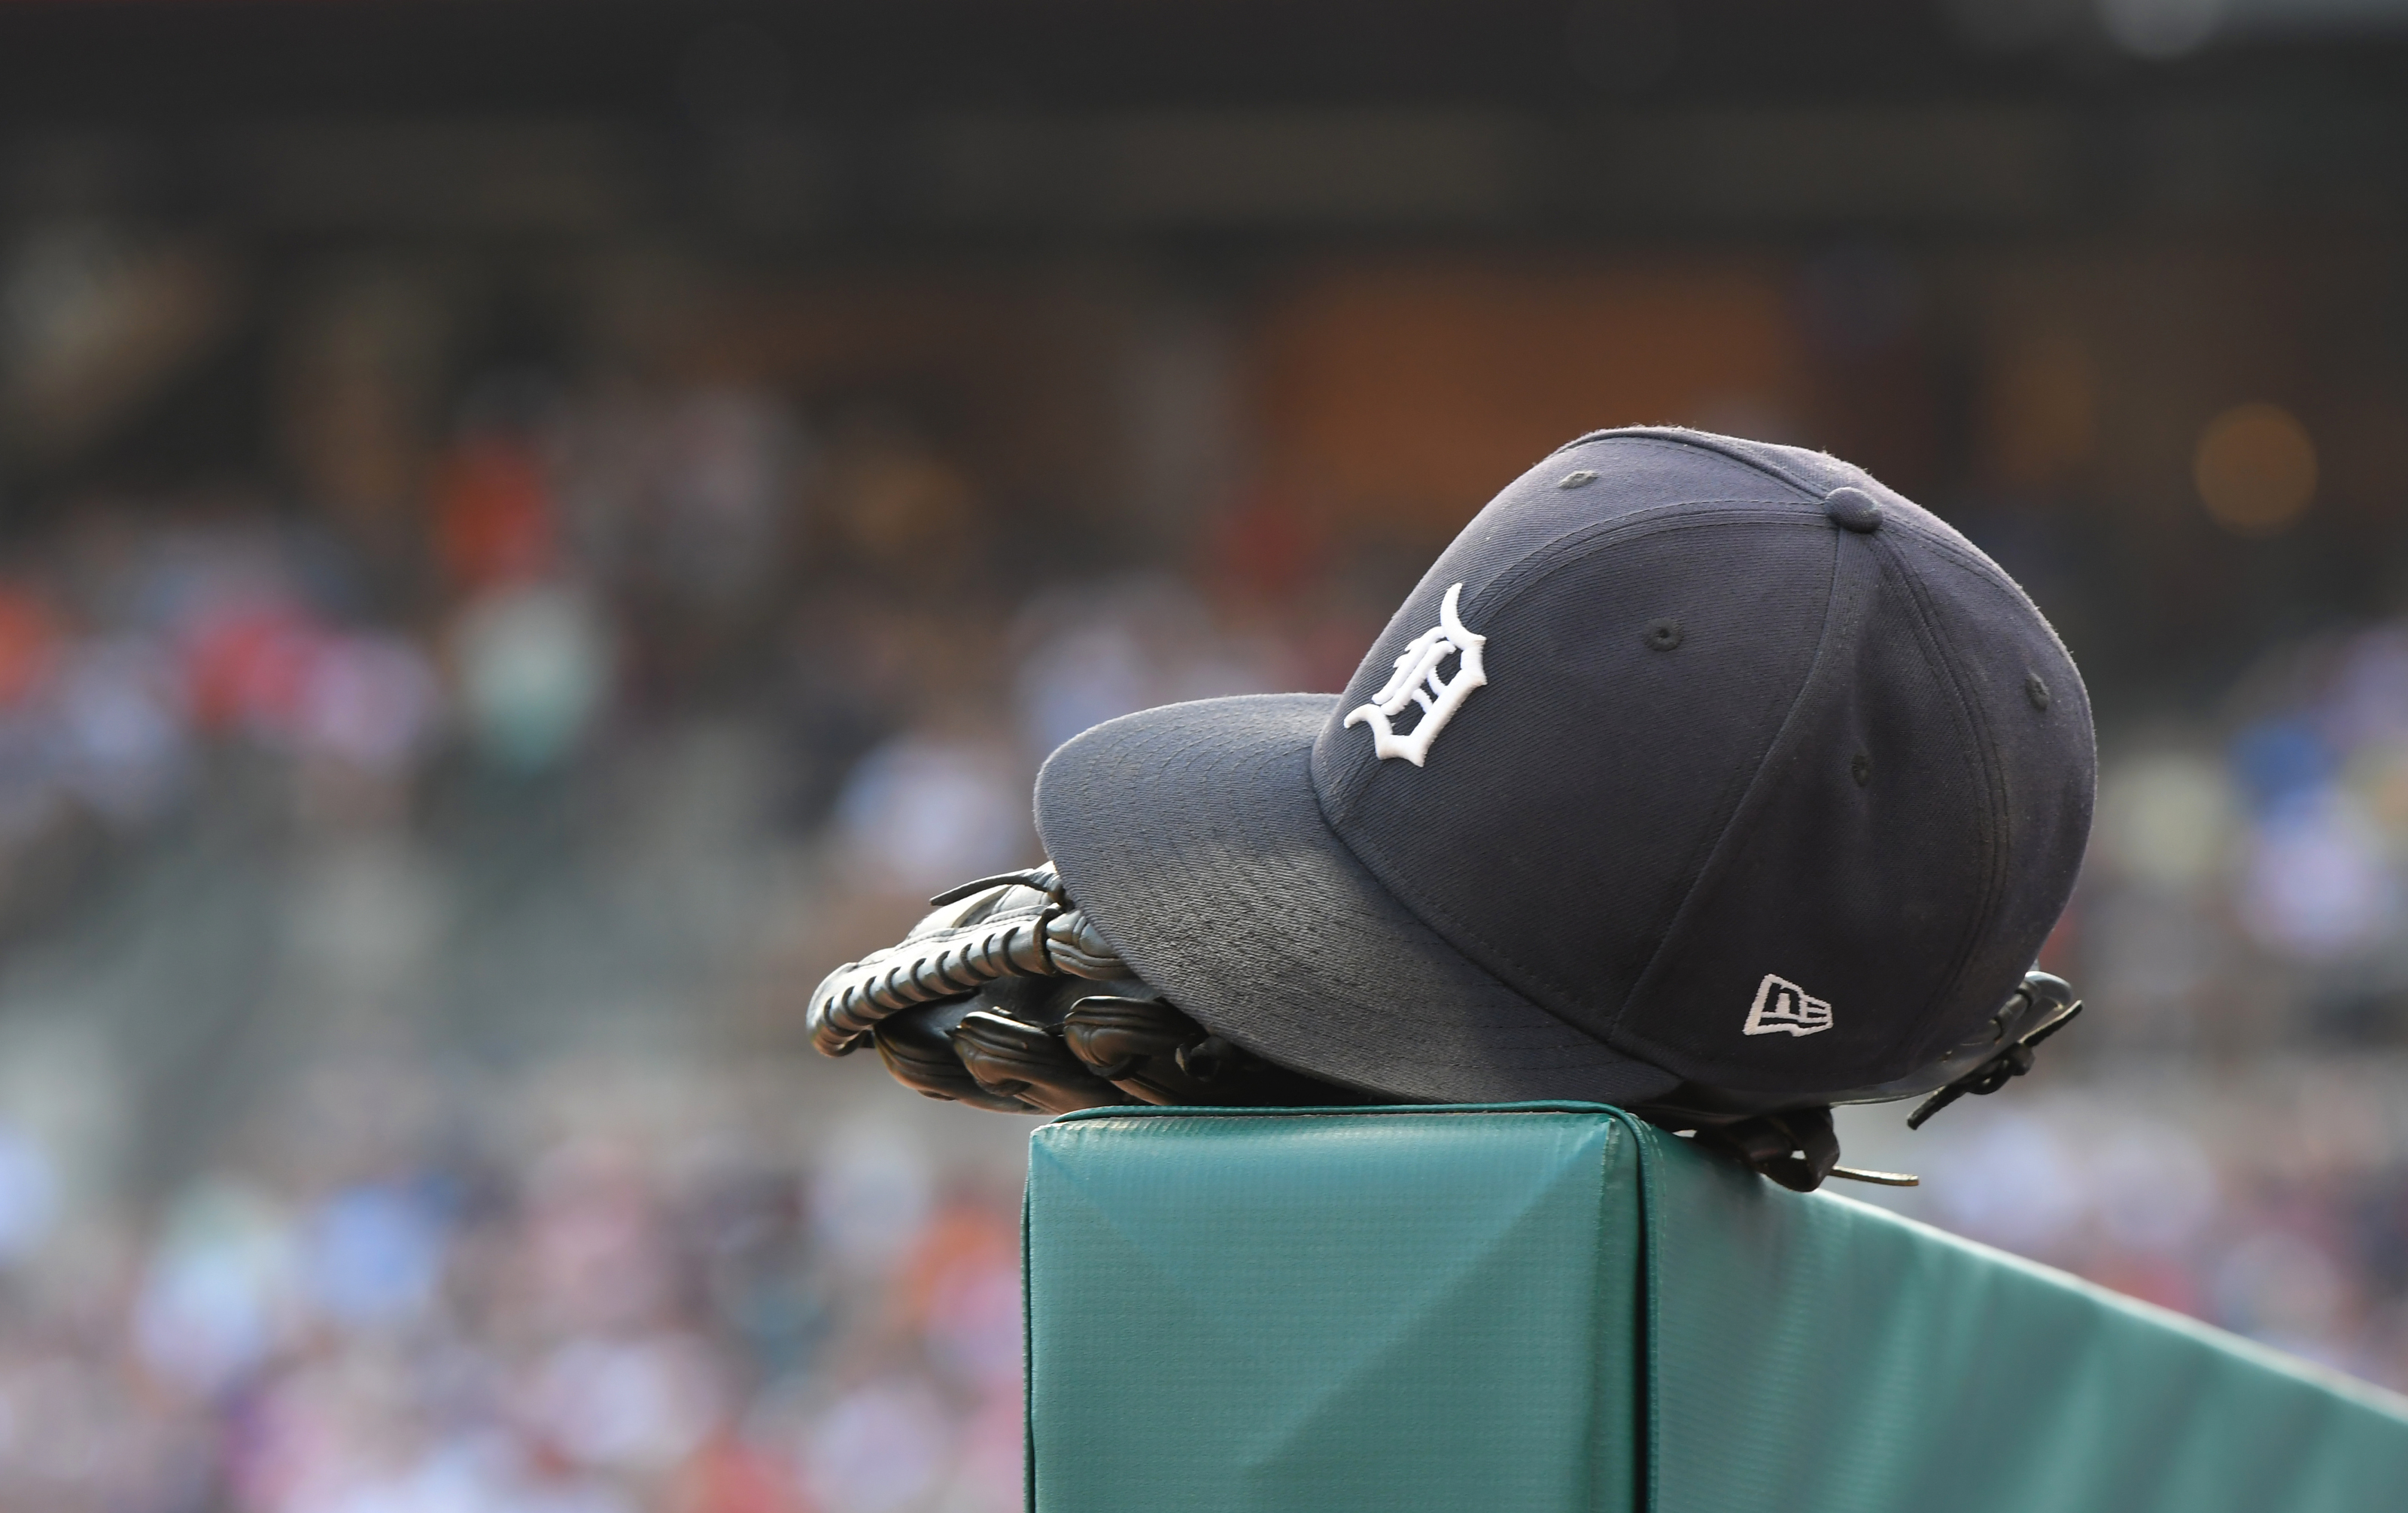 Detroit Tigers: Izaac Pacheco a longways away but has a bright future